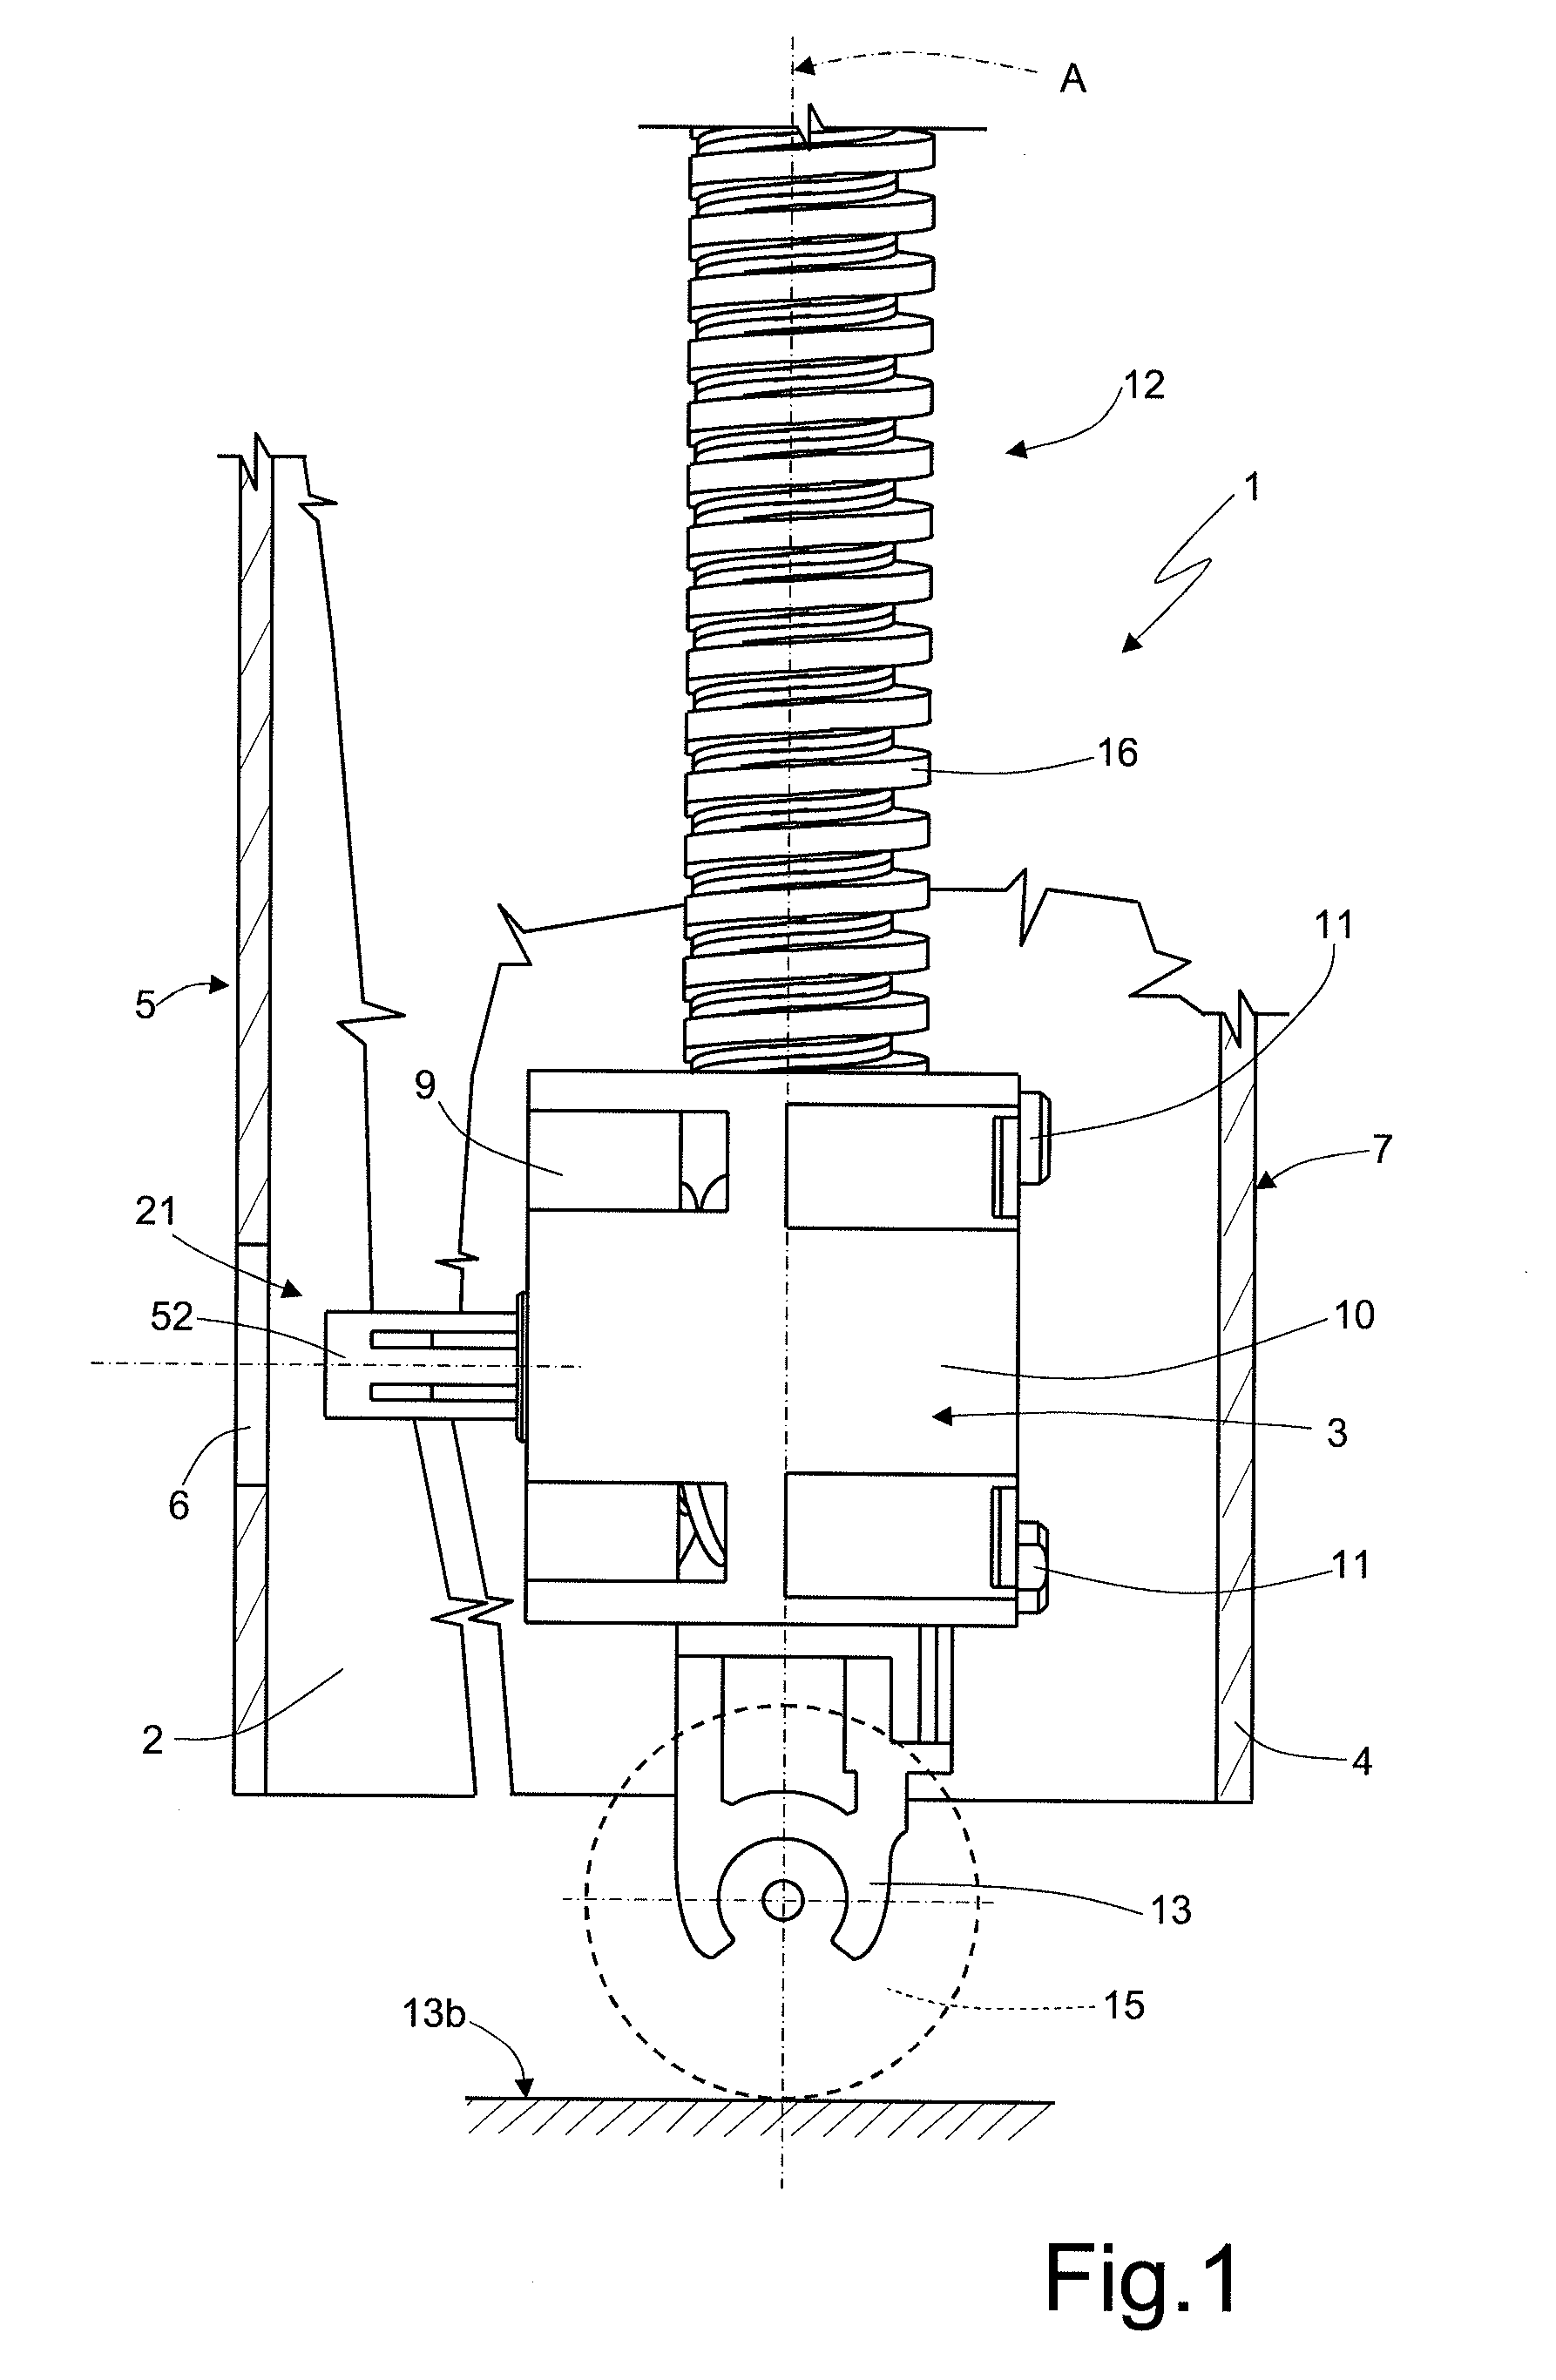 Adjustable foot, in particular a rear foot, for an electric household appliance